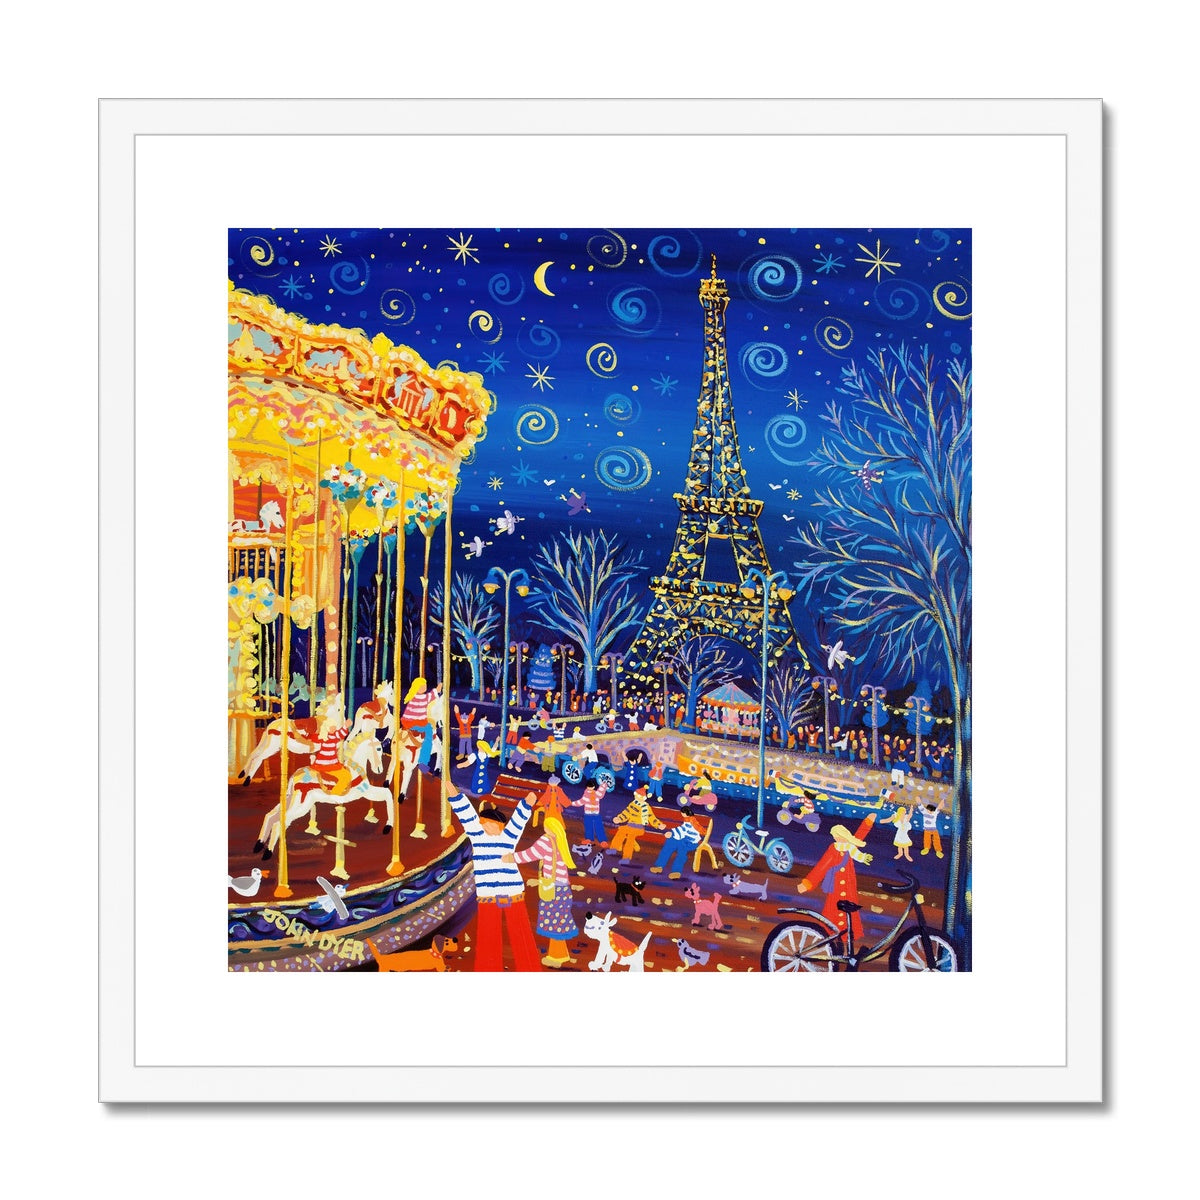 John Dyer Framed Open Edition French Art Print 'Twinkling Lights and Carousel Delights, Paris, Eiffel Tower' French Art Gallery